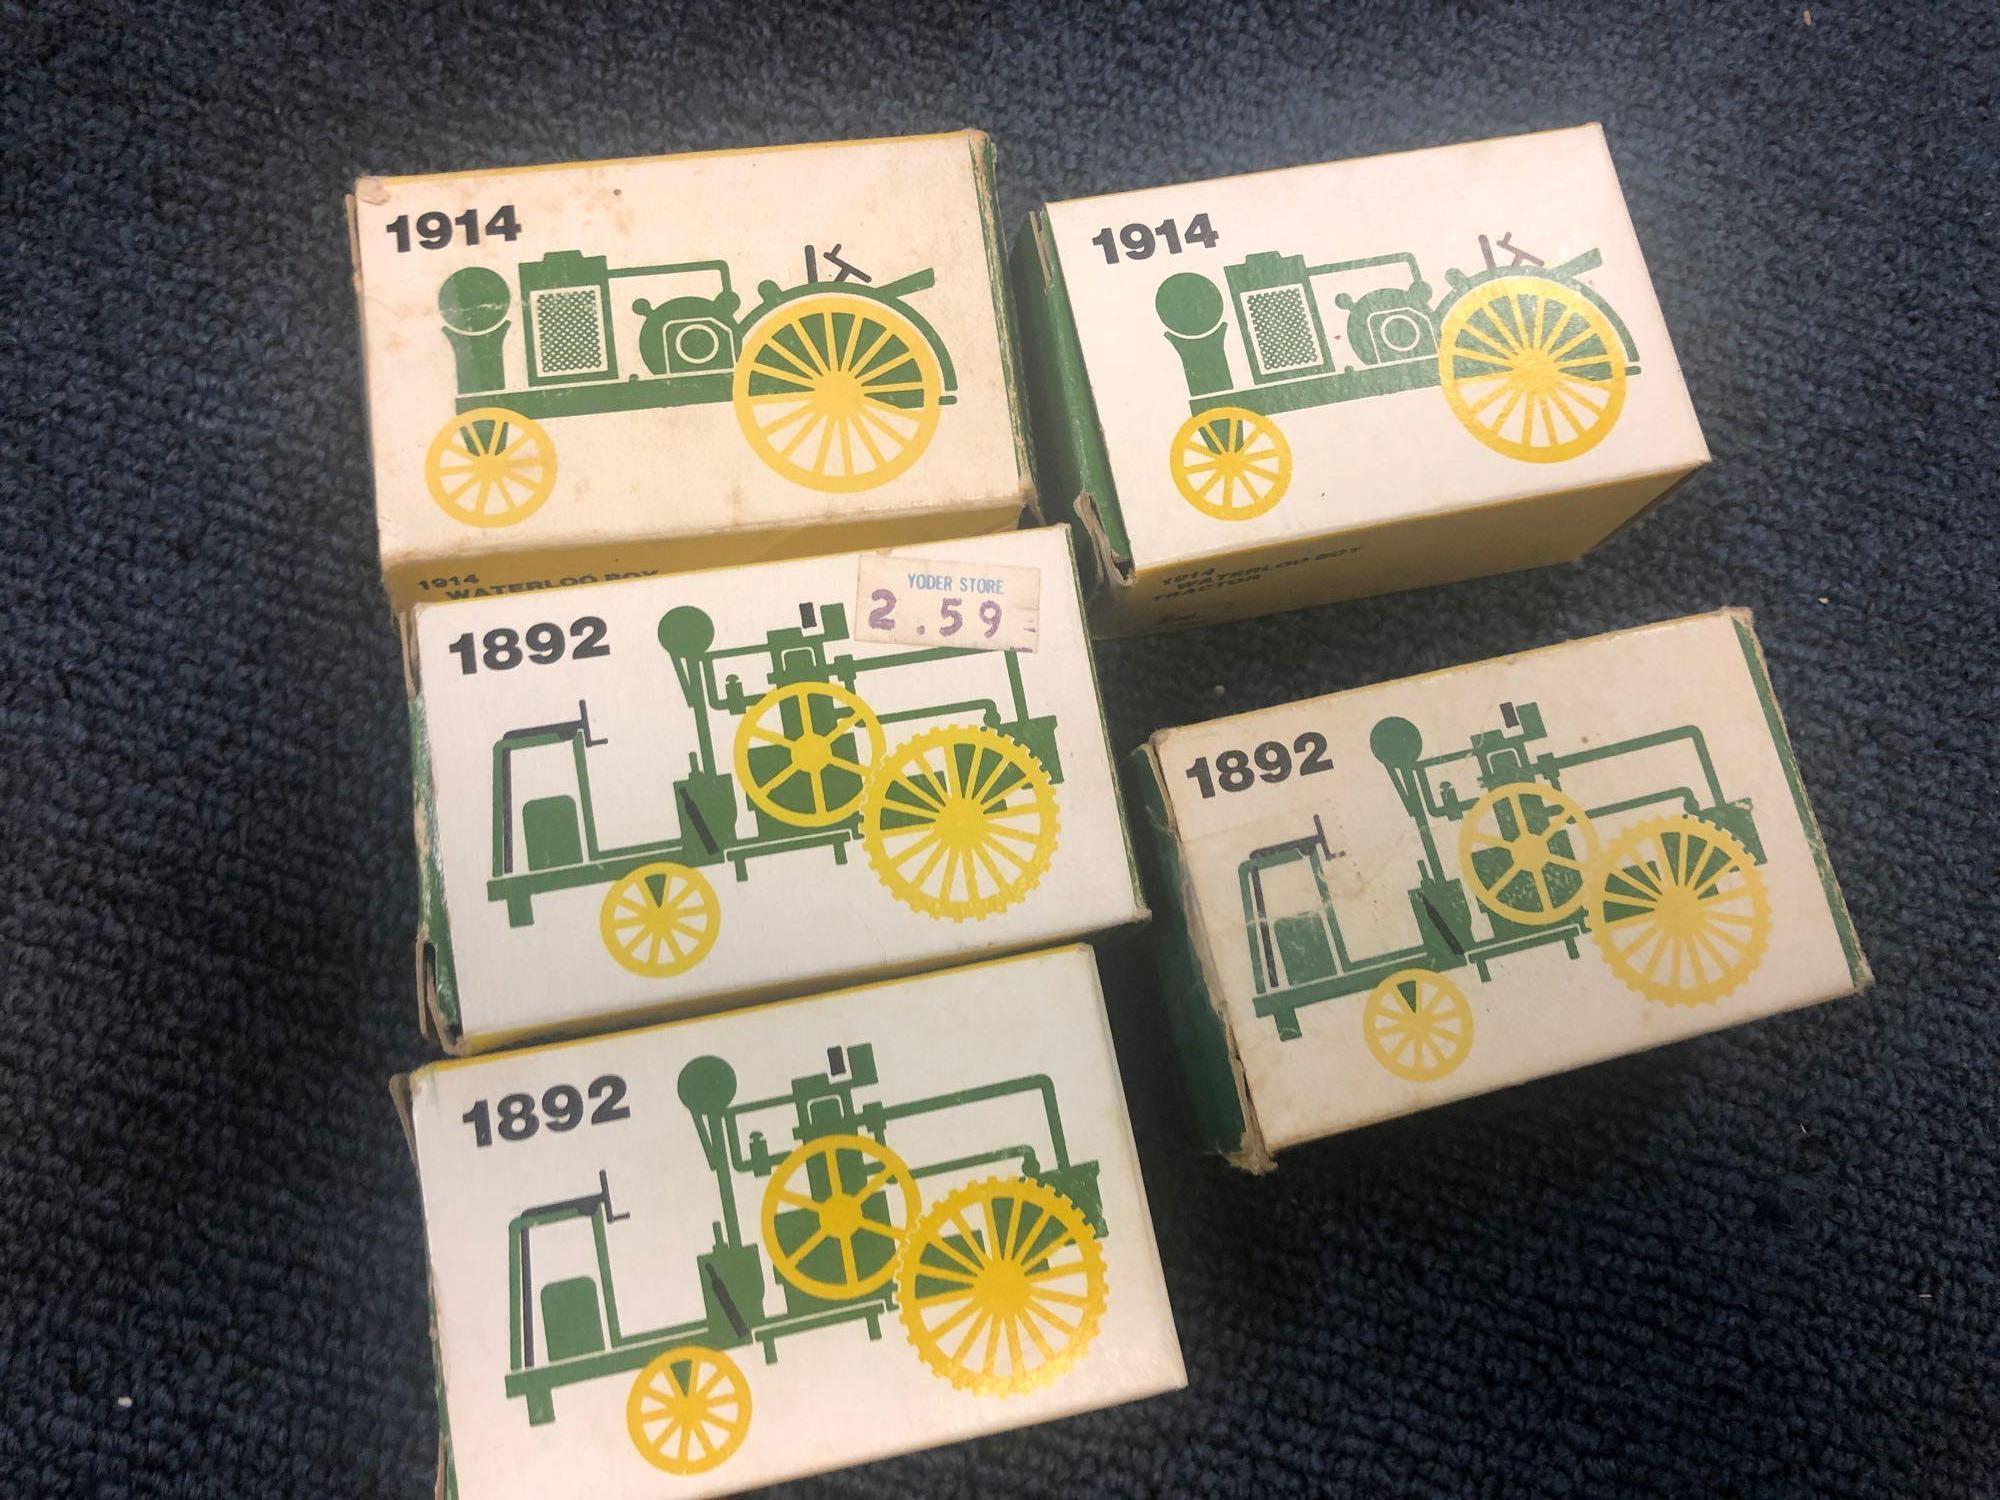 Miniature John Deere and other tractor diecast models